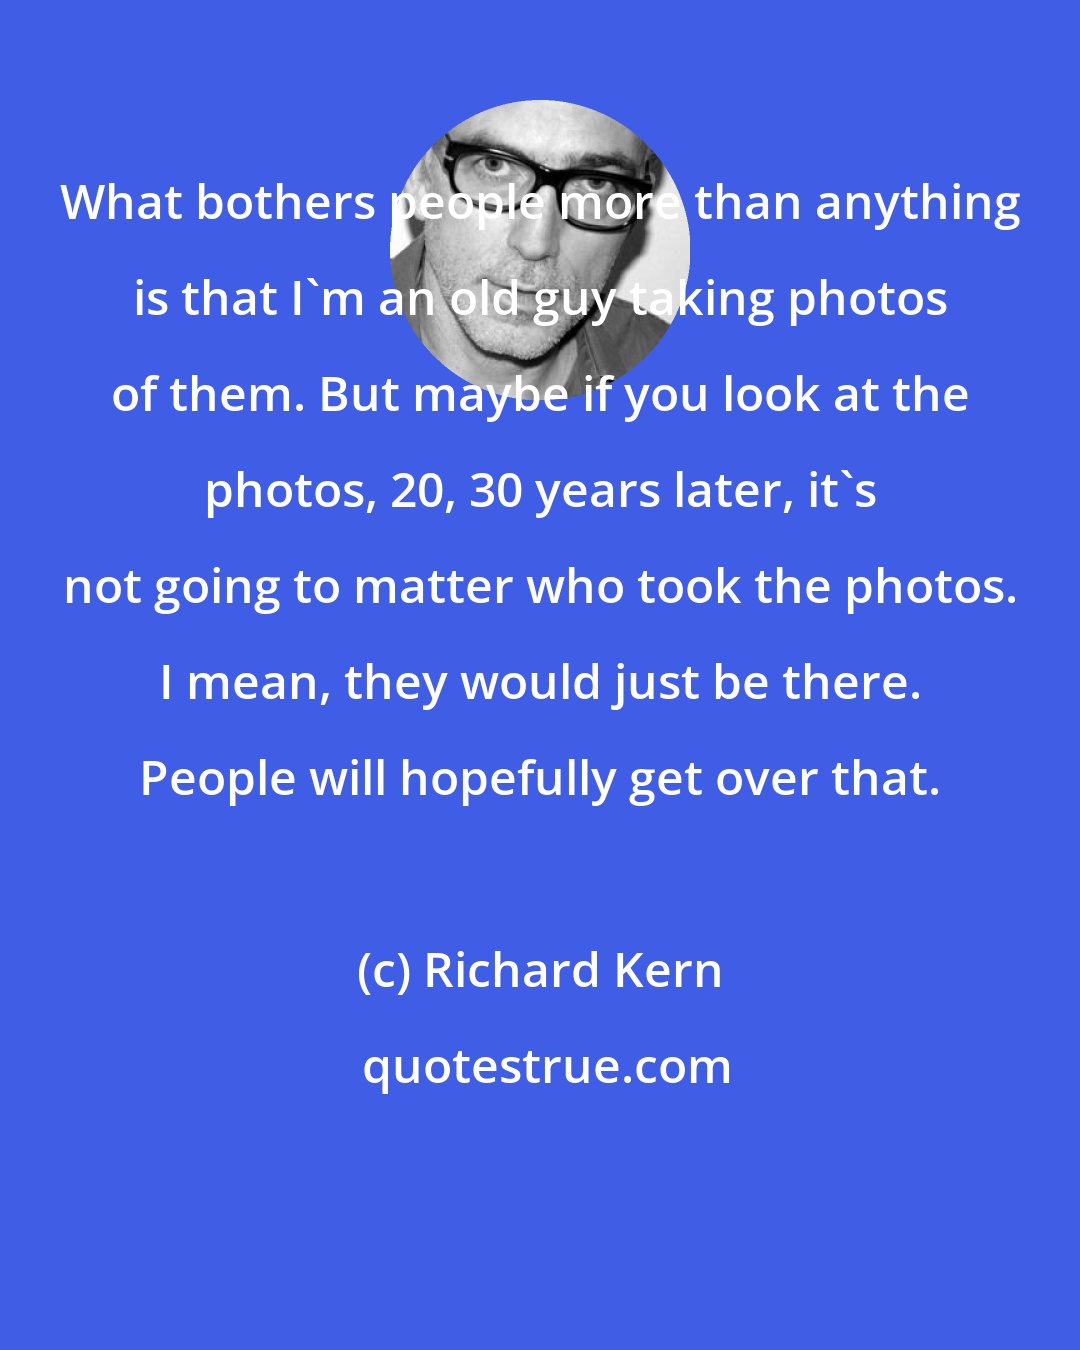 Richard Kern: What bothers people more than anything is that I'm an old guy taking photos of them. But maybe if you look at the photos, 20, 30 years later, it's not going to matter who took the photos. I mean, they would just be there. People will hopefully get over that.